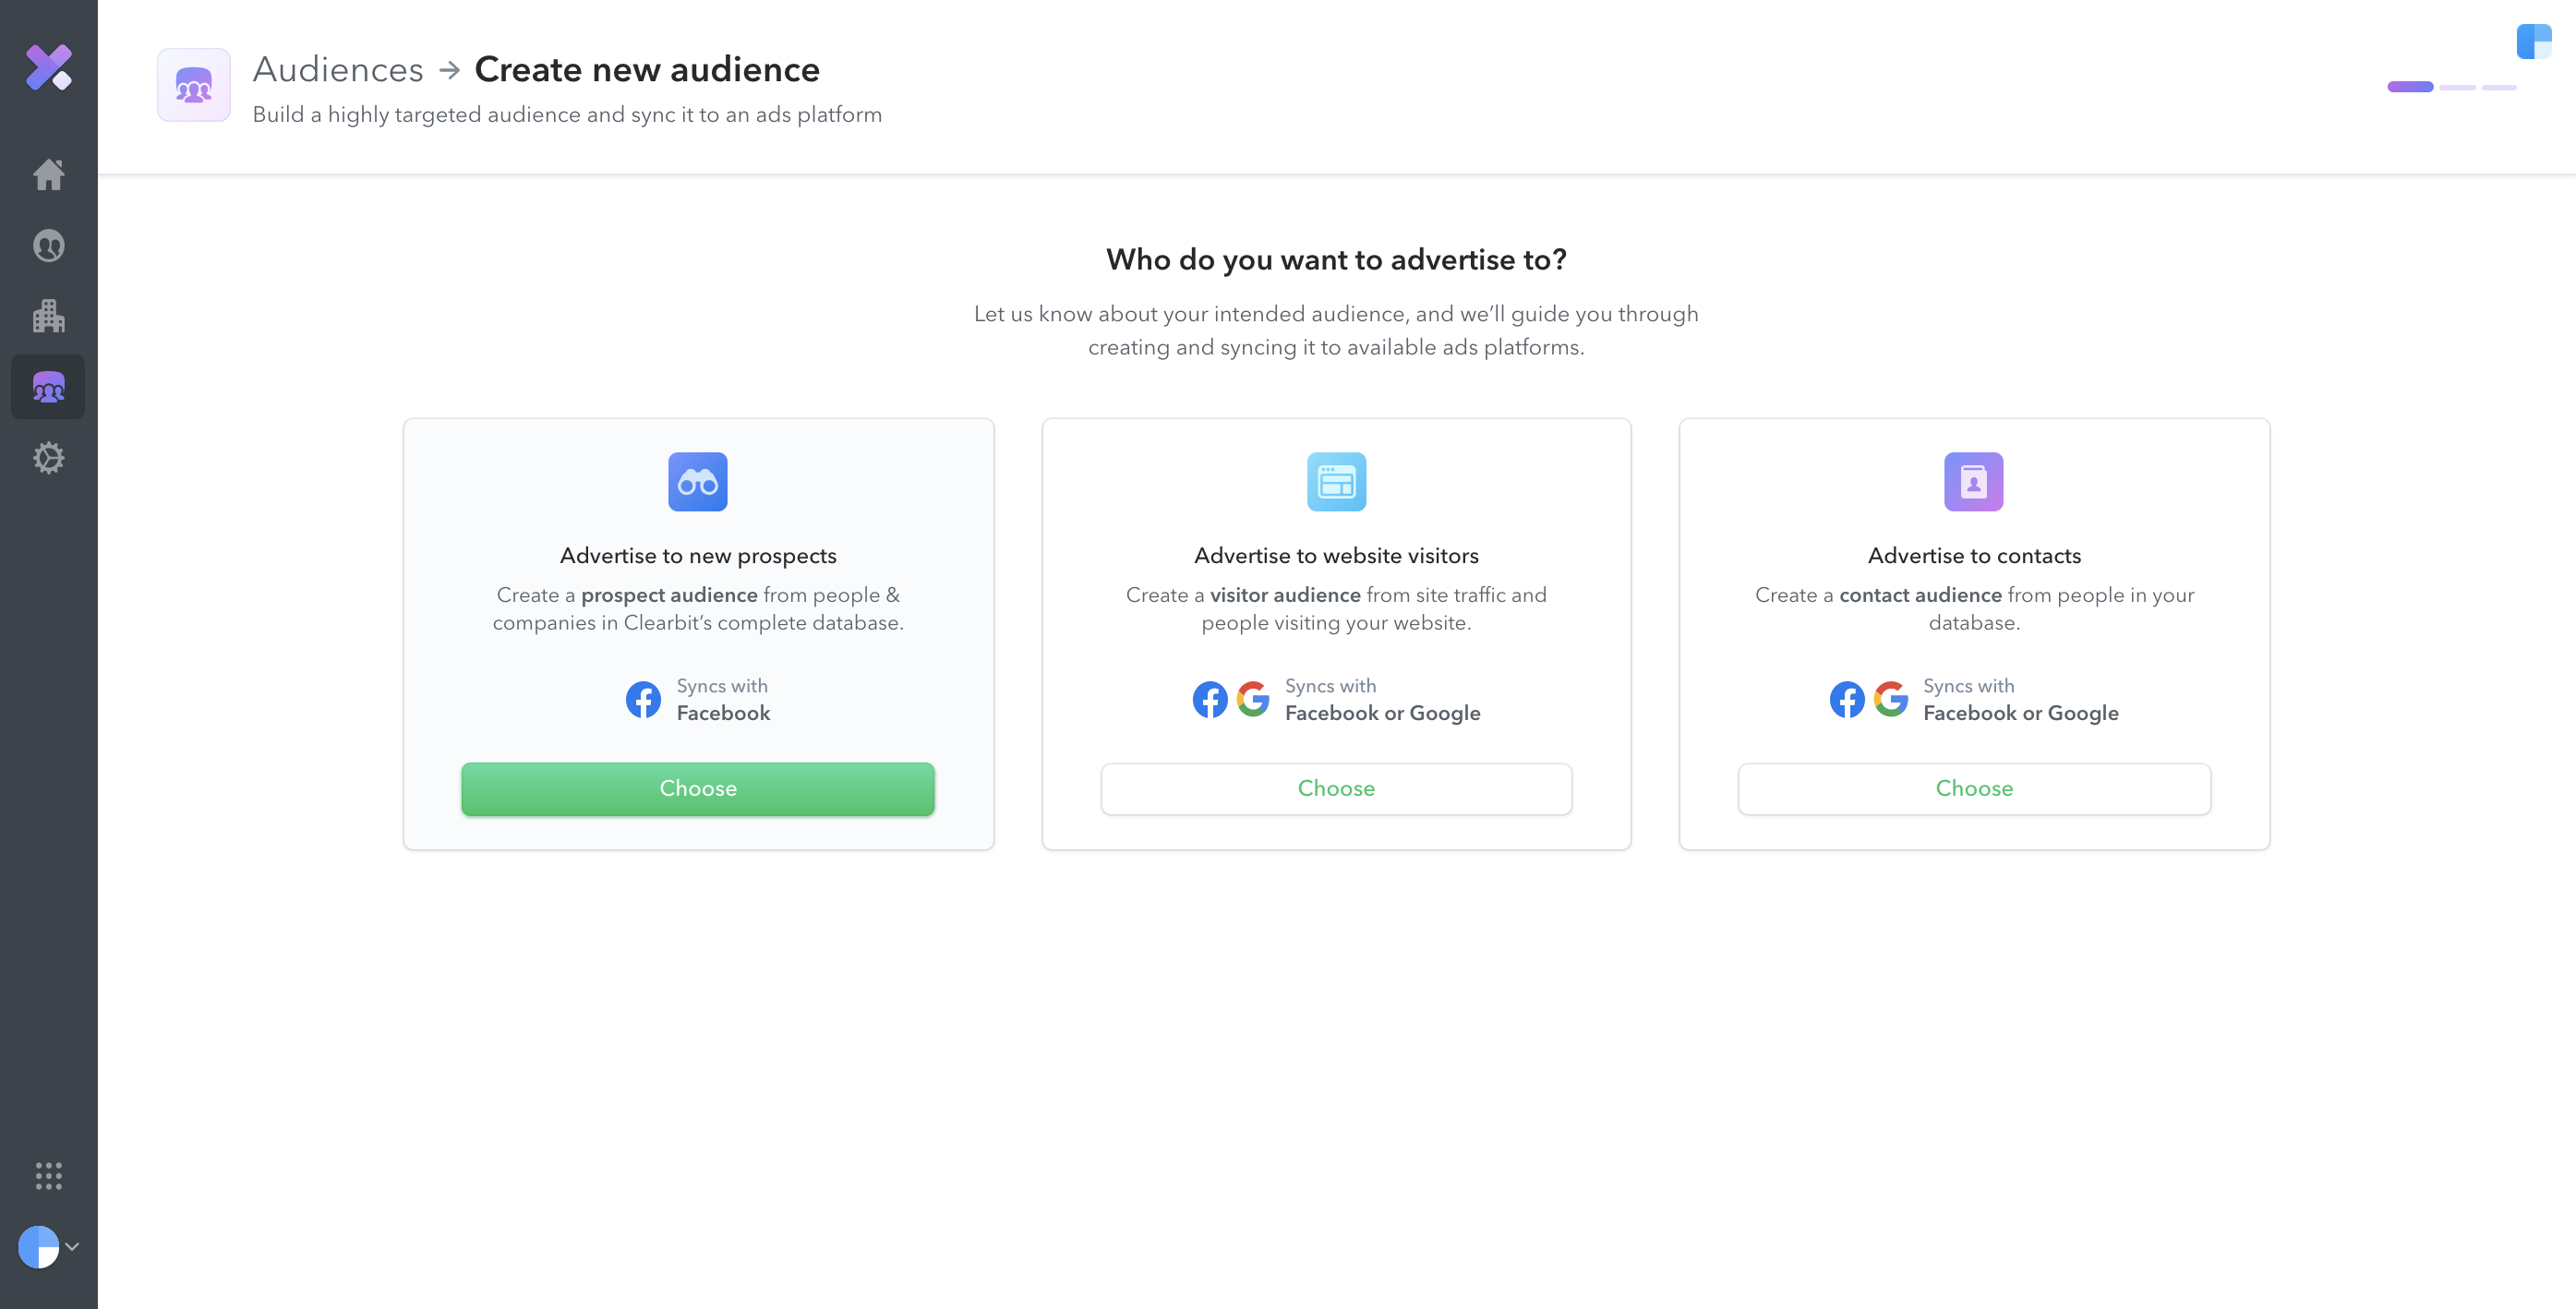 With Clearbit Prospect Audiences, you can go ahead and create Custom Audiences with people from Clearbit's "Data-Verse".